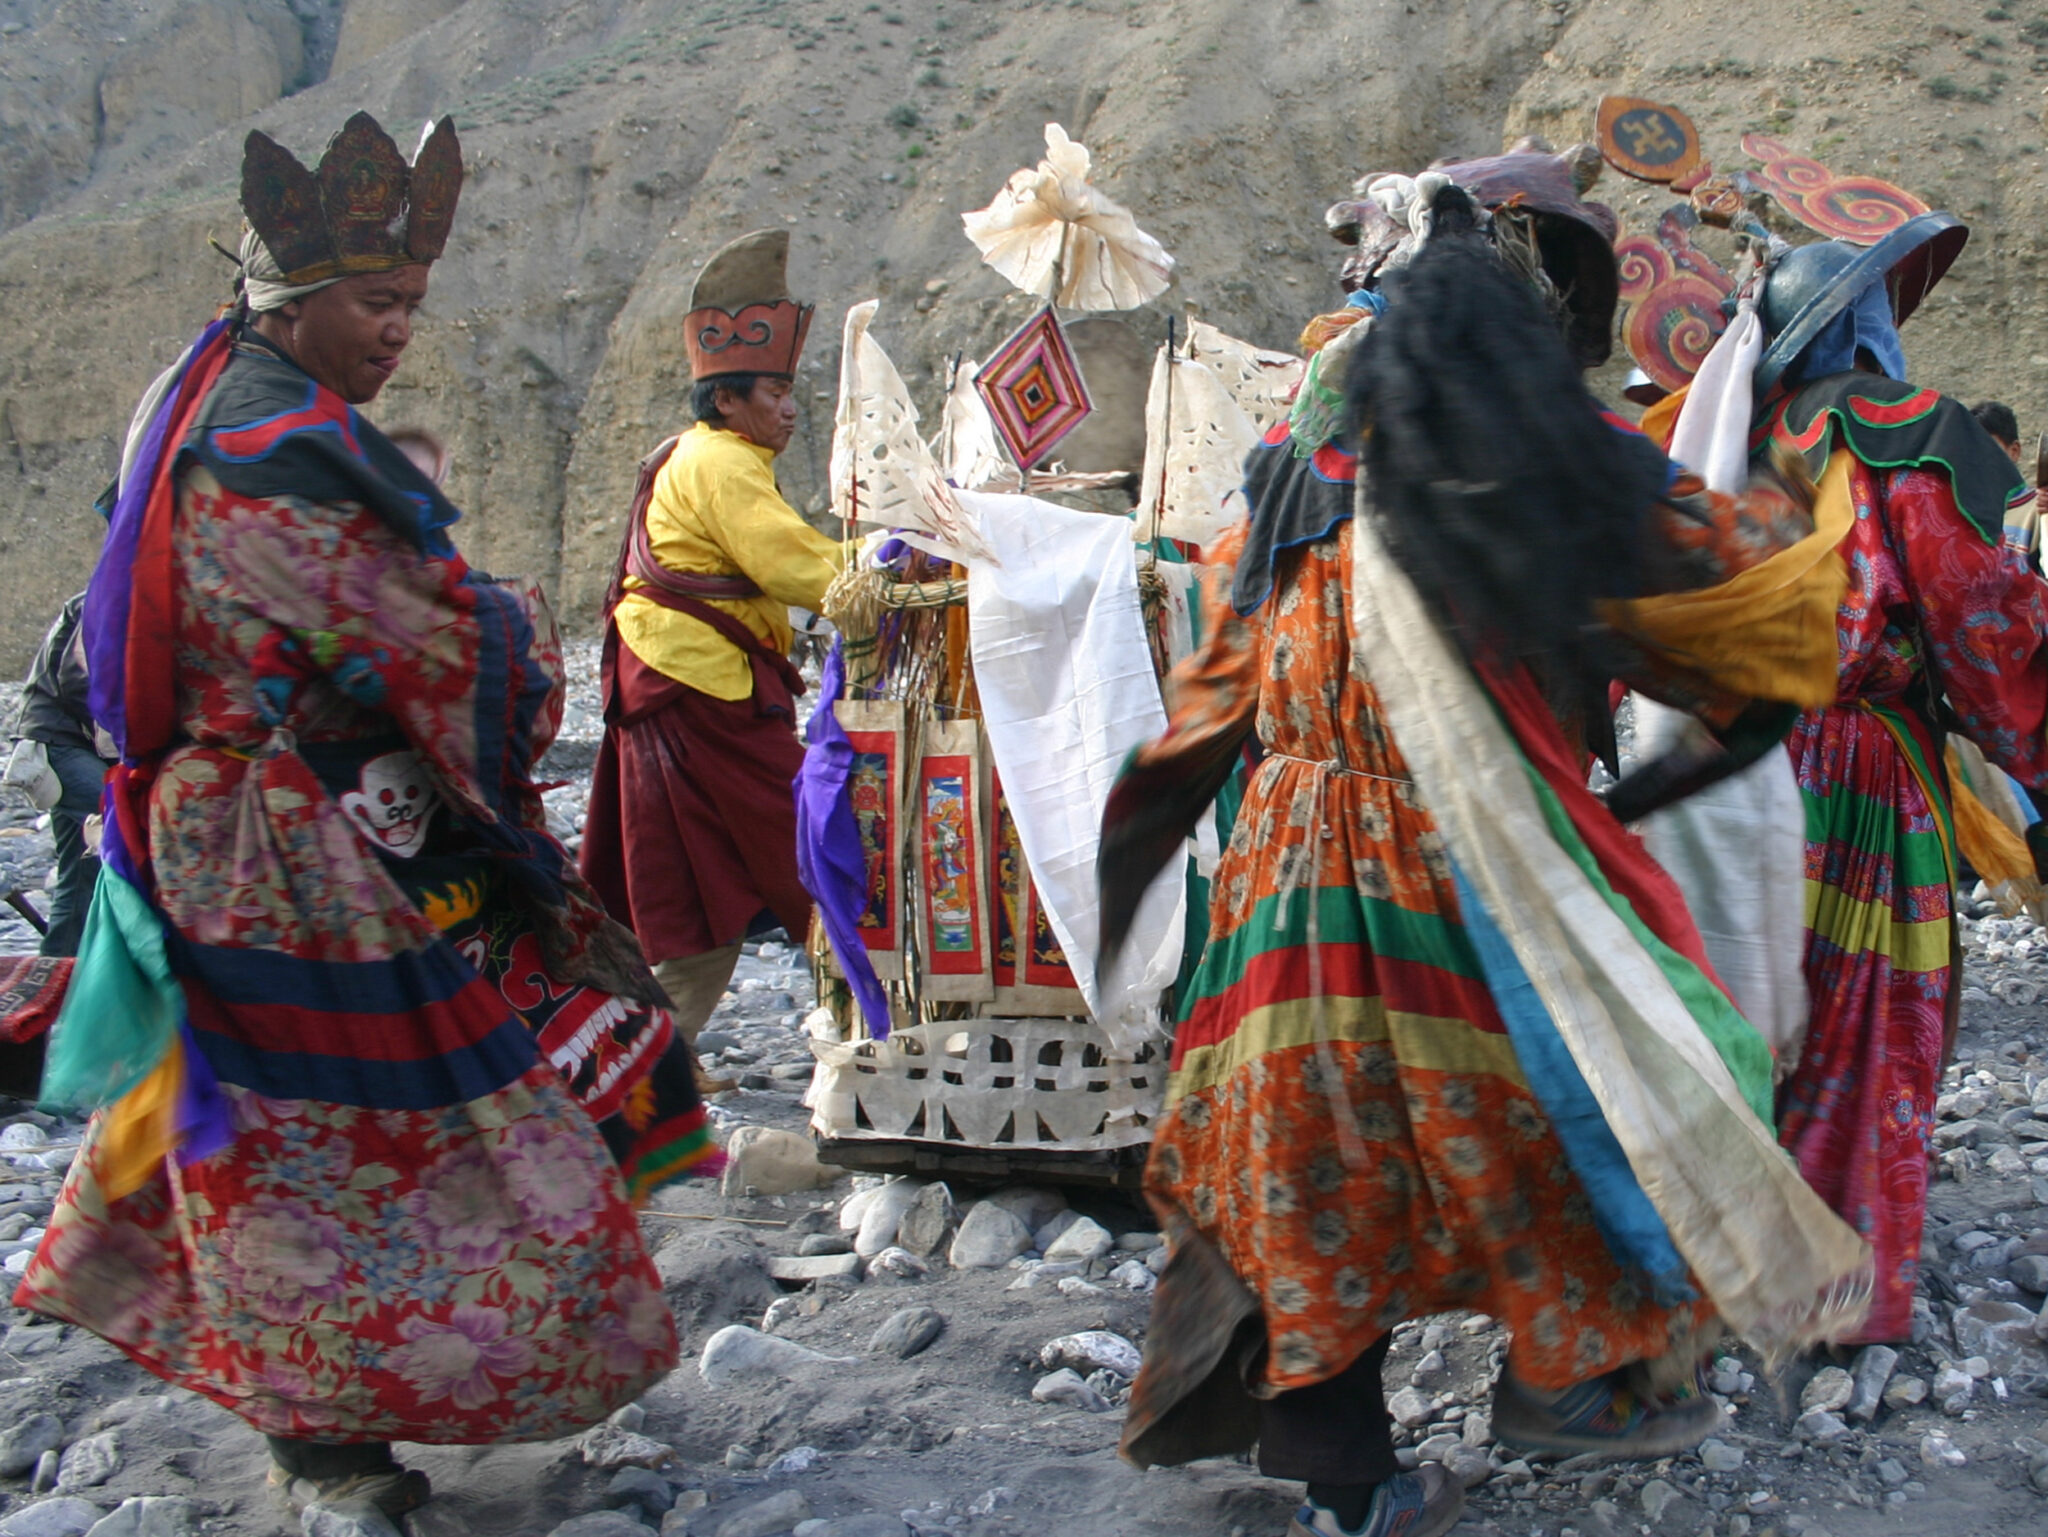 Lamas dressed in colorful robes dance around religious implement decorated with textiles and yarn lozenge